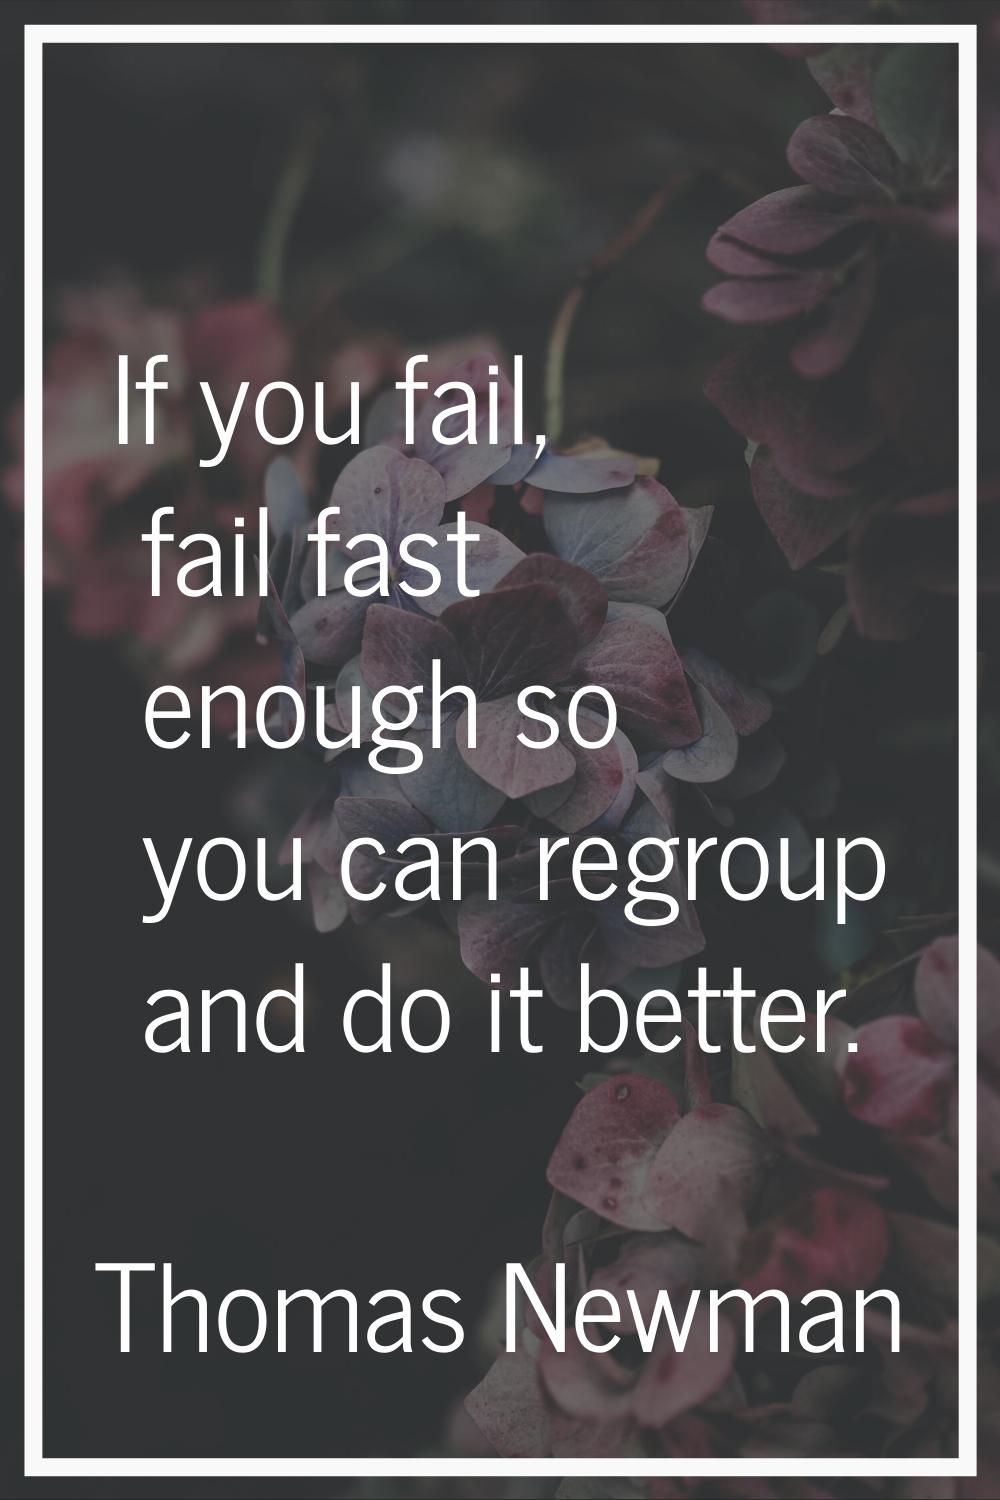 If you fail, fail fast enough so you can regroup and do it better.